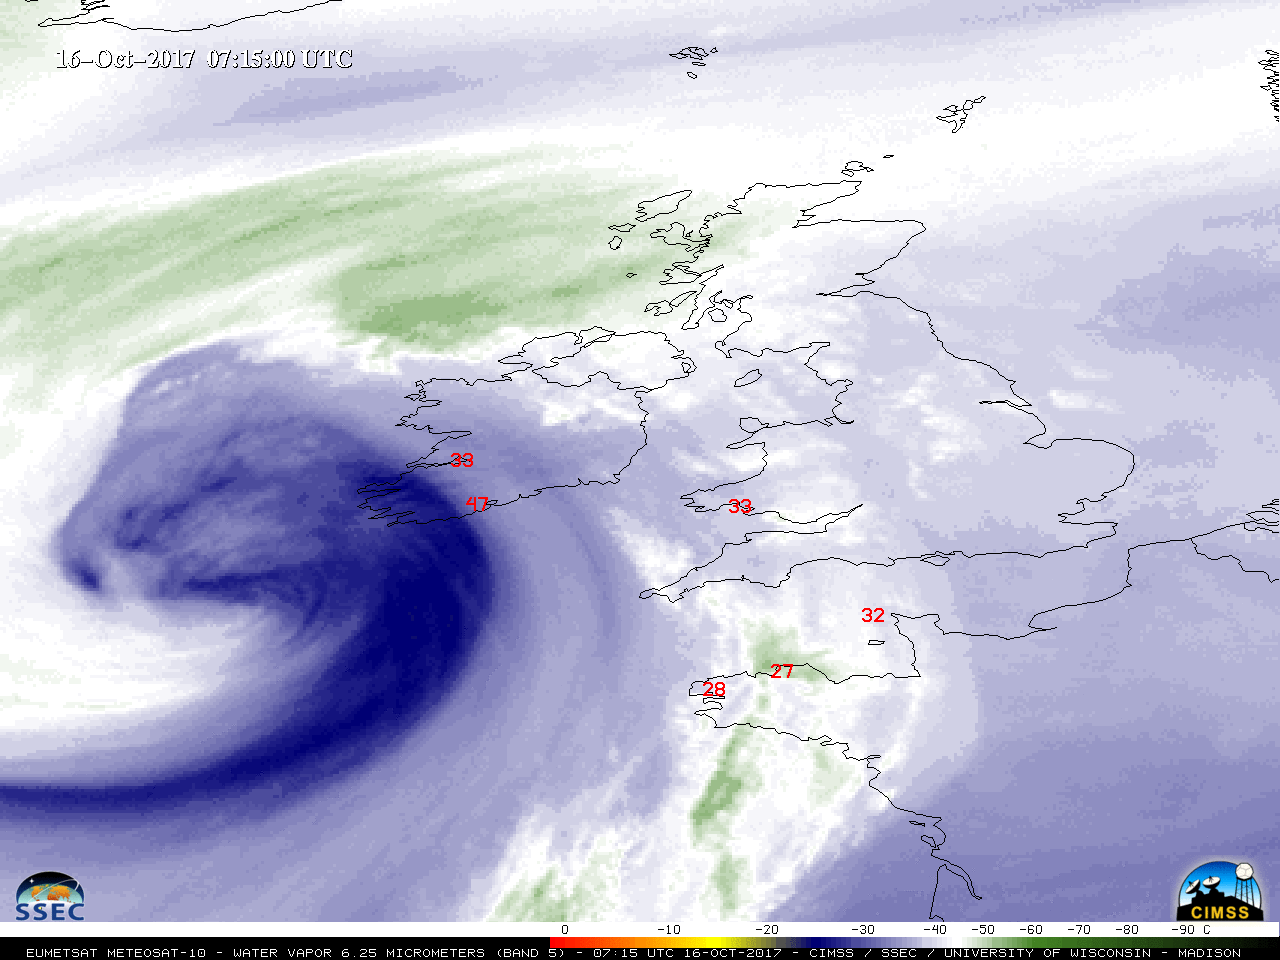 Meteosat-10 Water Vapor (6.25 µm) images, with hourly surface wind gusts (knots) plotted in red [click to play MP4 animation]